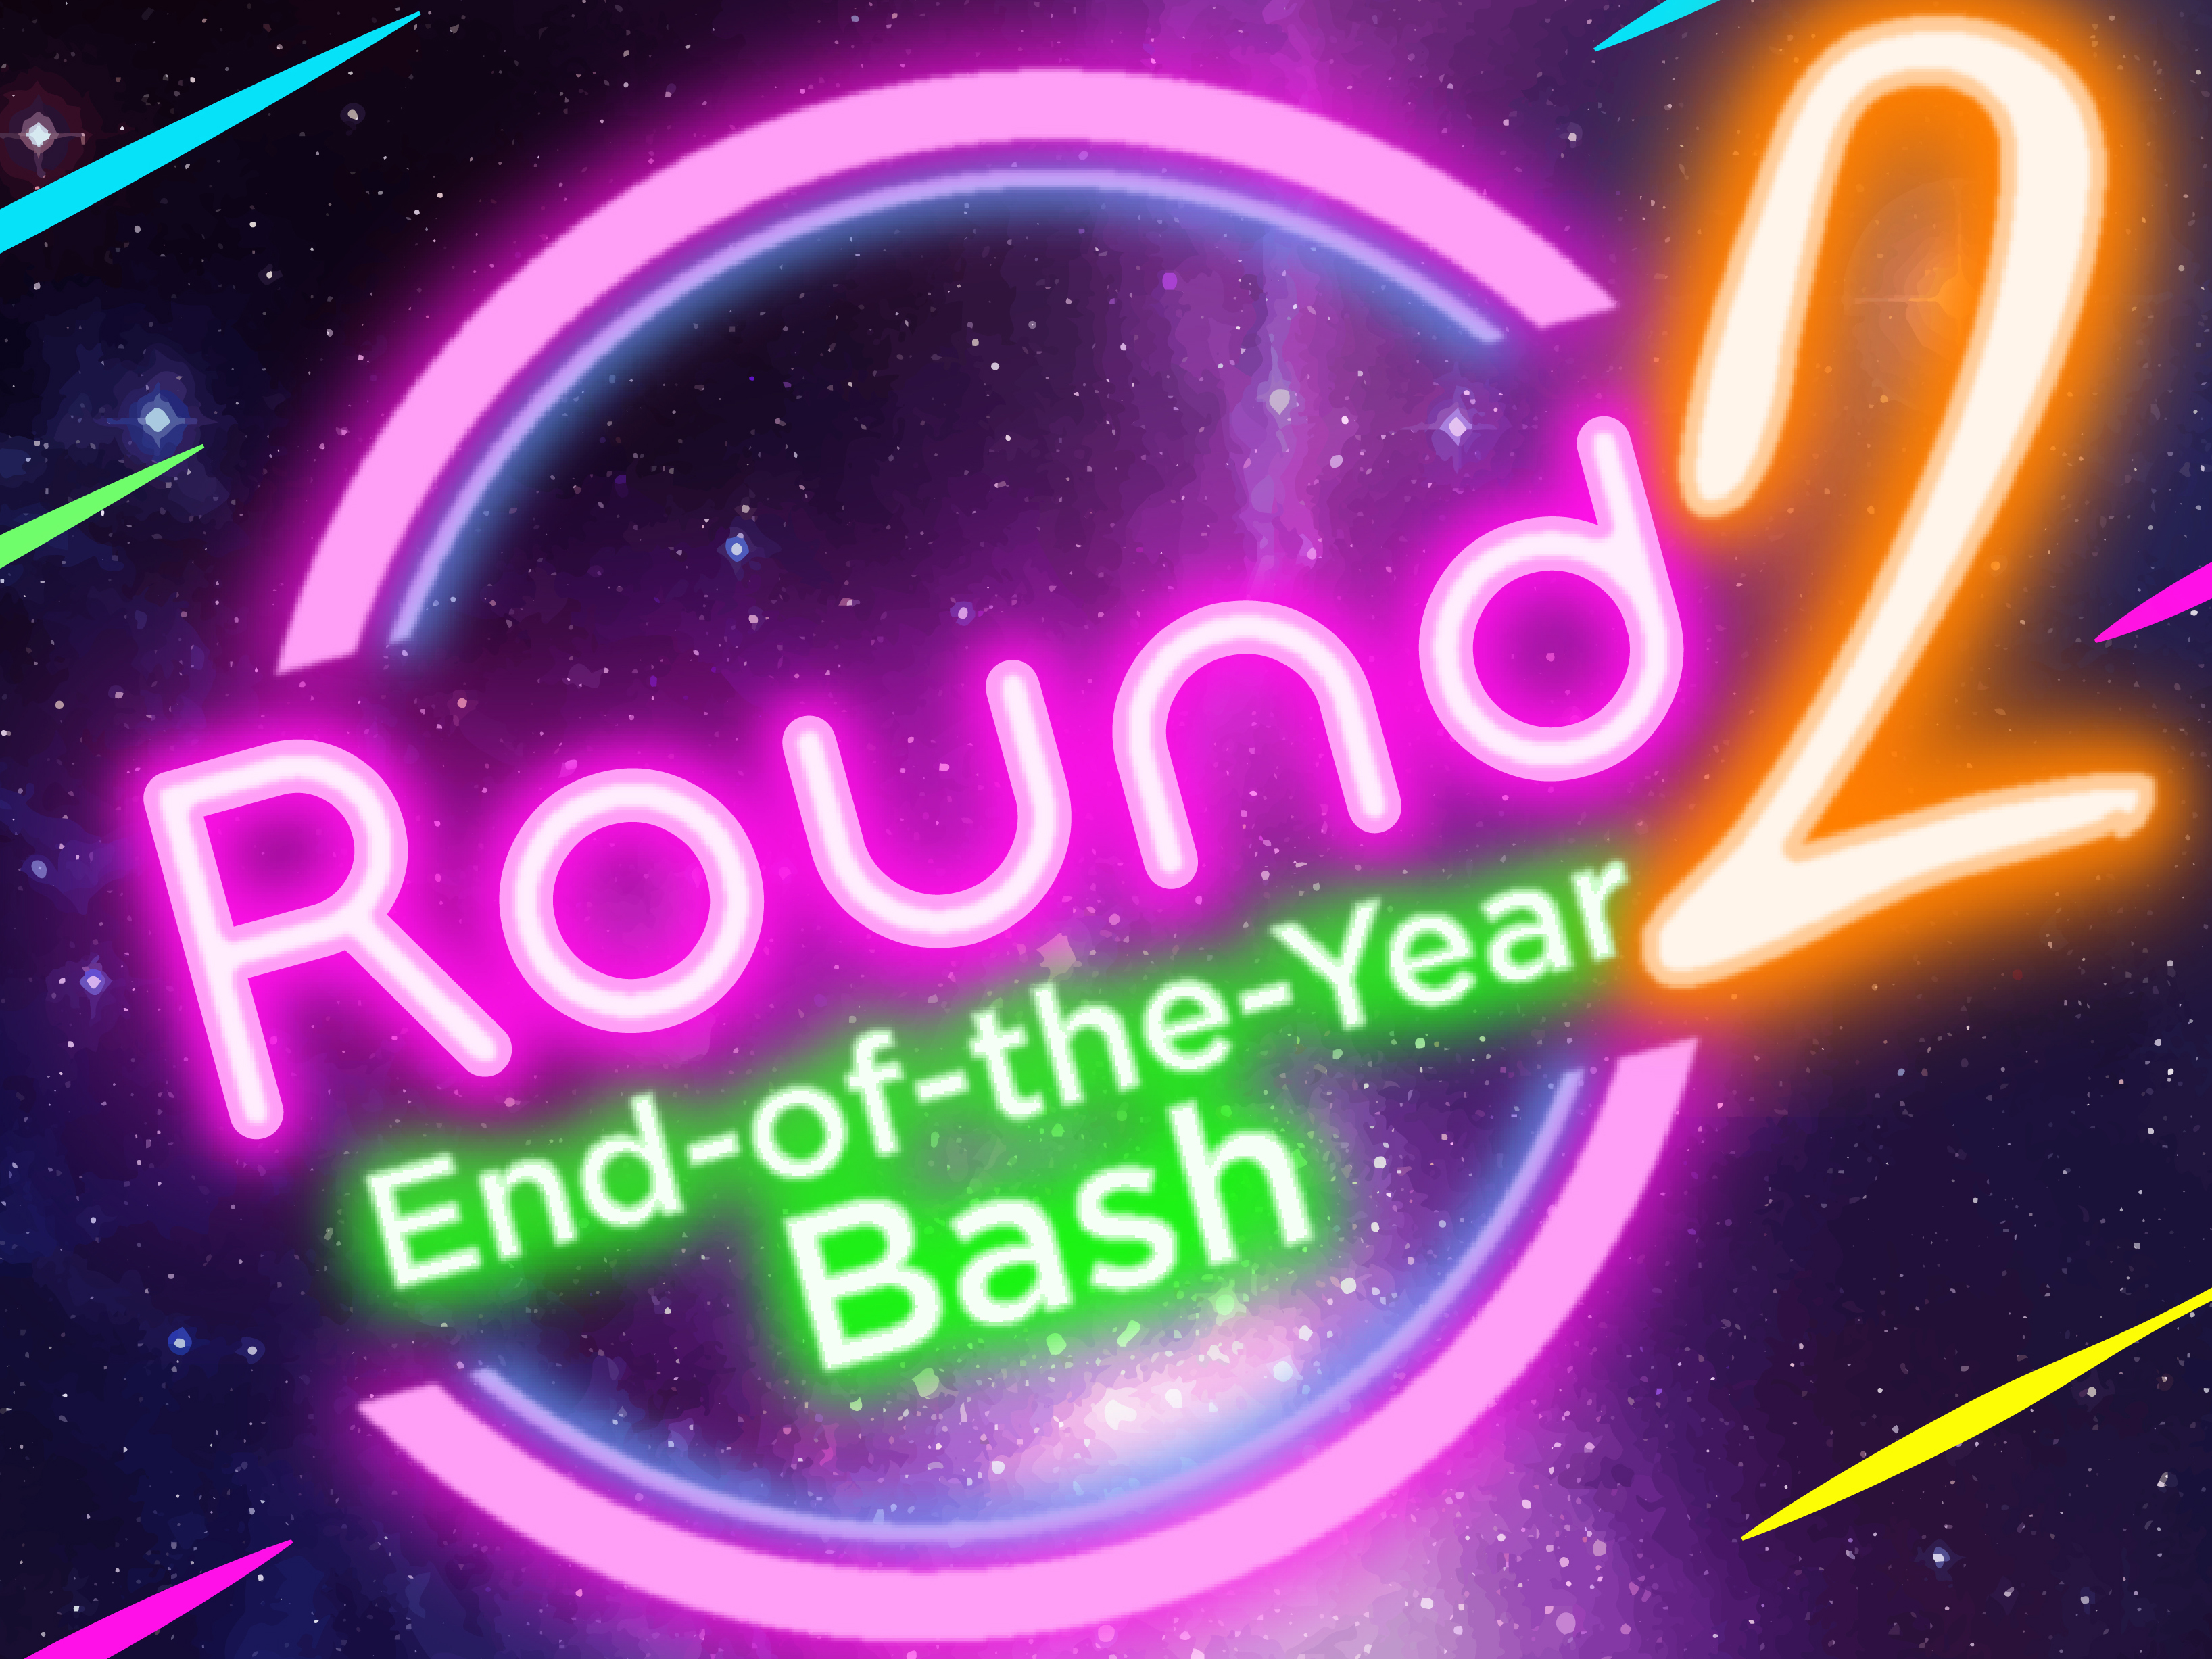 Round 2: End-of-the-Year Bash is hosted by Campus Nightlife and Student Leadership, Involvement, & Community Engagement from 7 to 11 p.m. April 24.